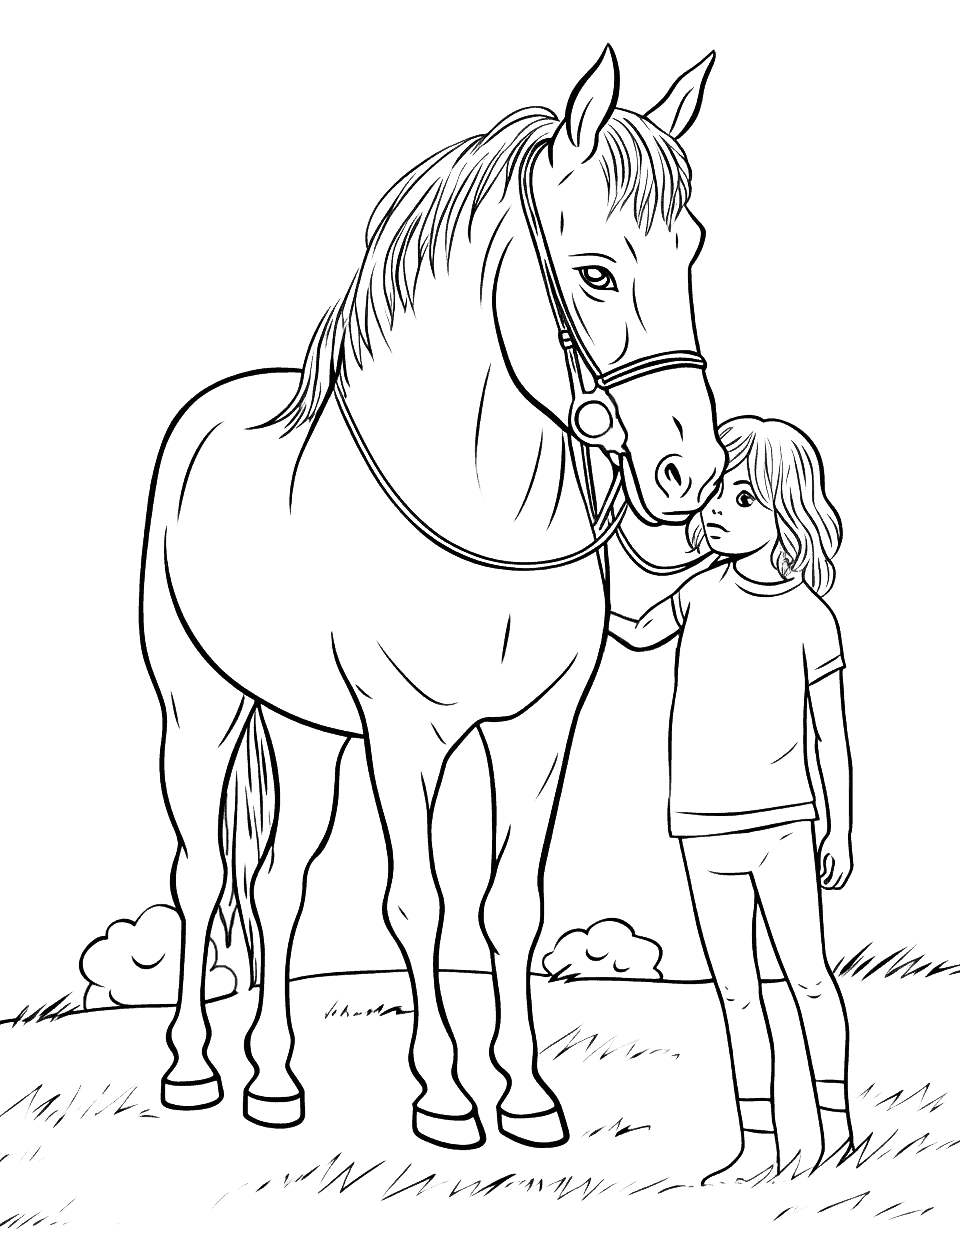 Girl and Her Best Friend Horse Coloring Page - A girl and her horse sharing a moment of affection.